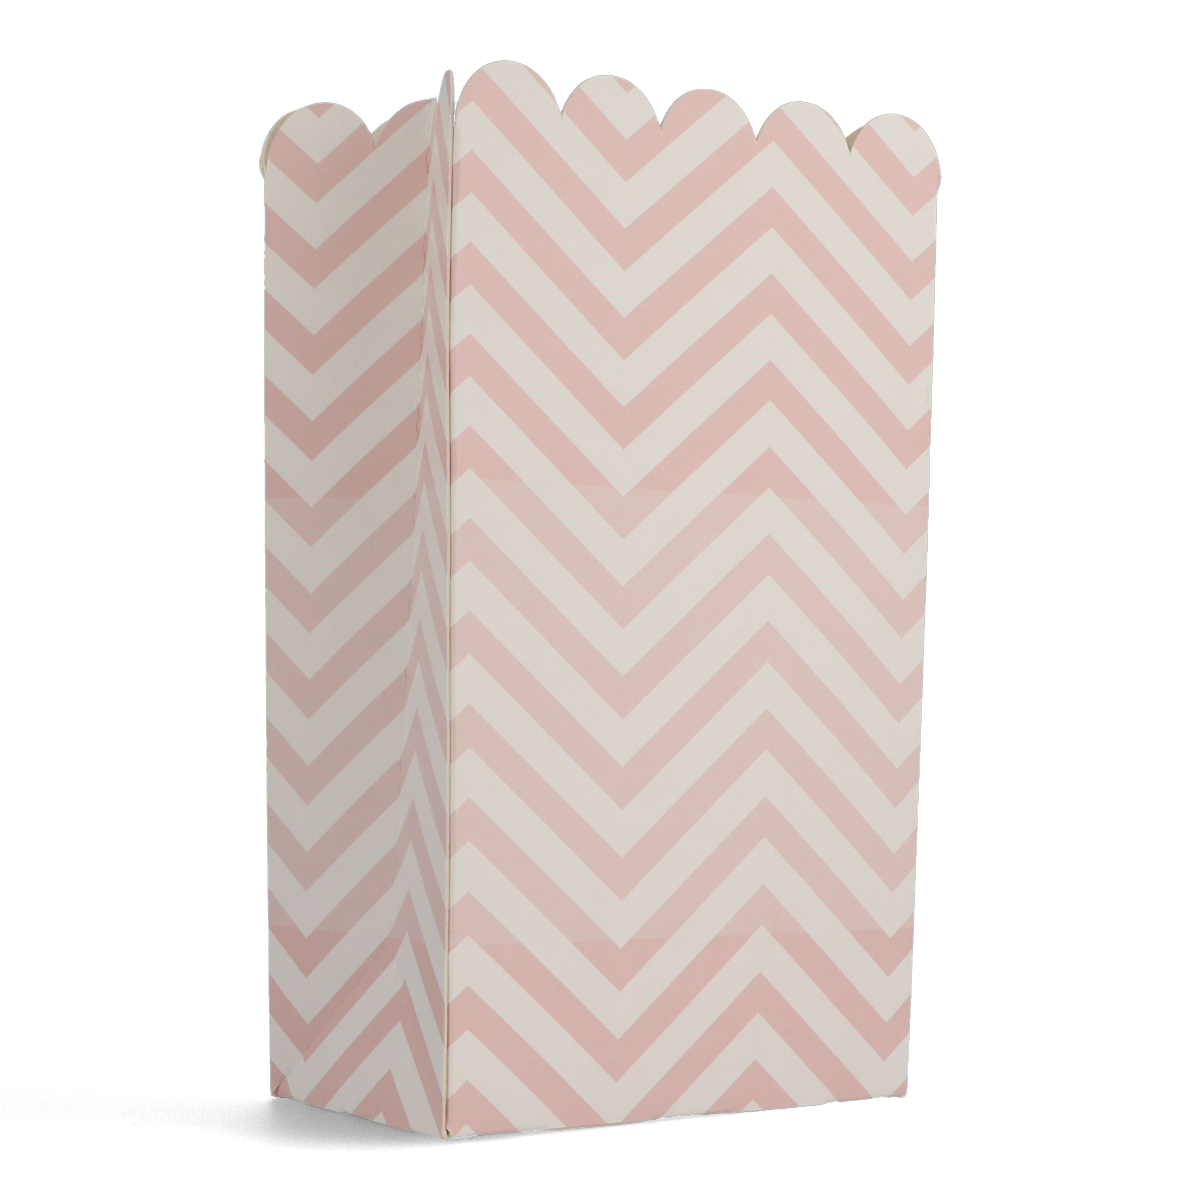 Popcorn bag with pink zigzag pattern